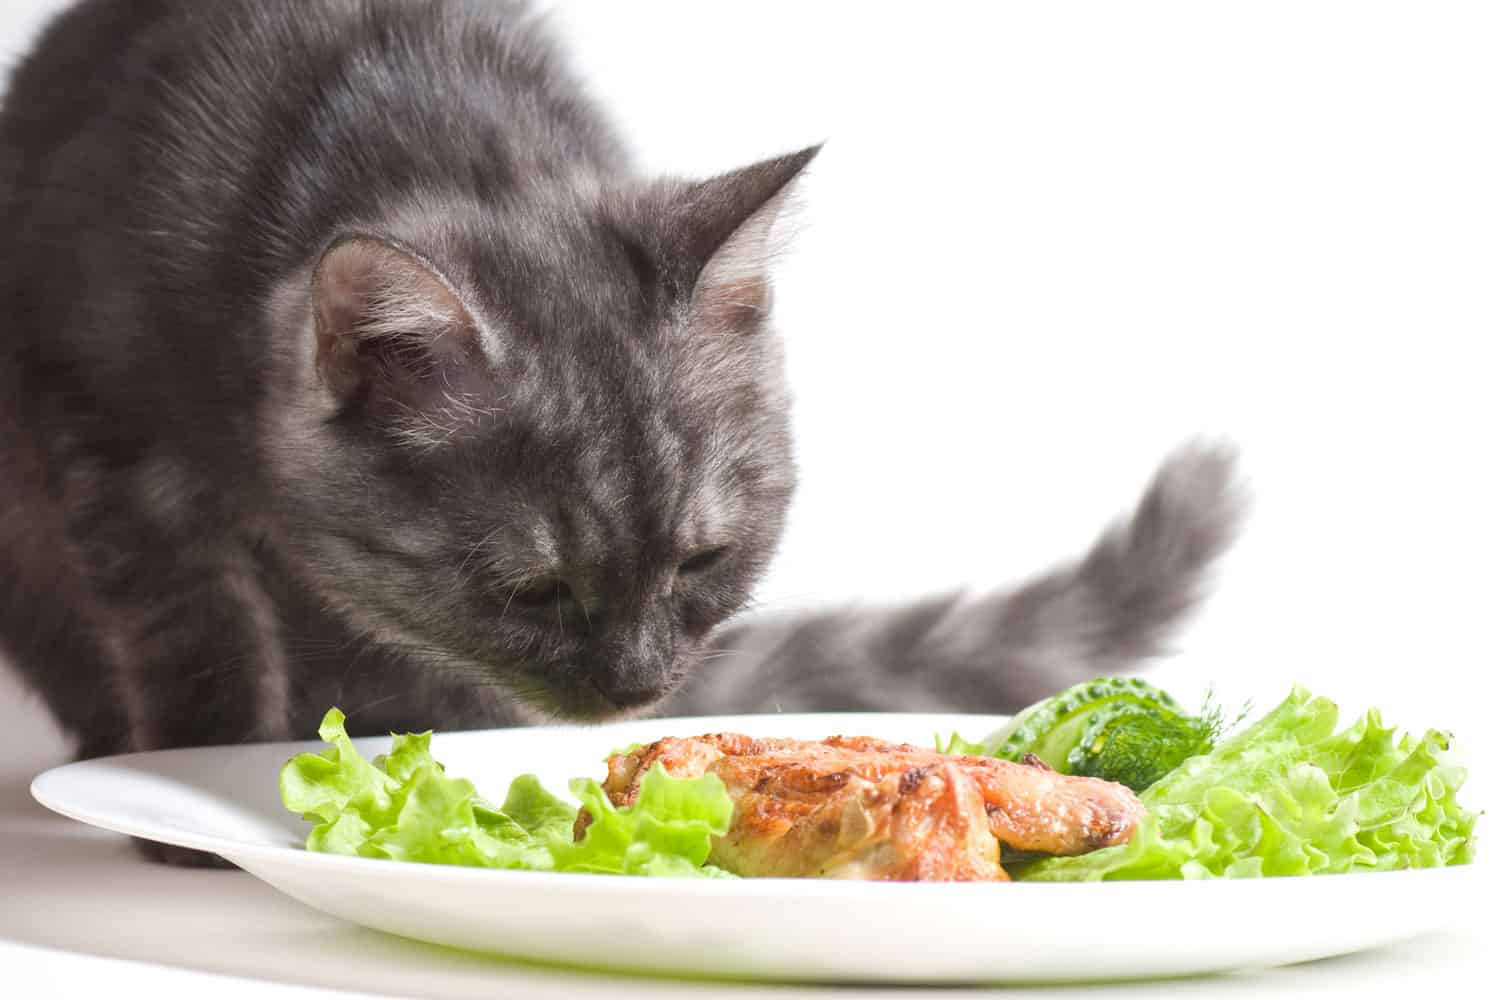 Beautiful Scottish young cat eating chicken wings
